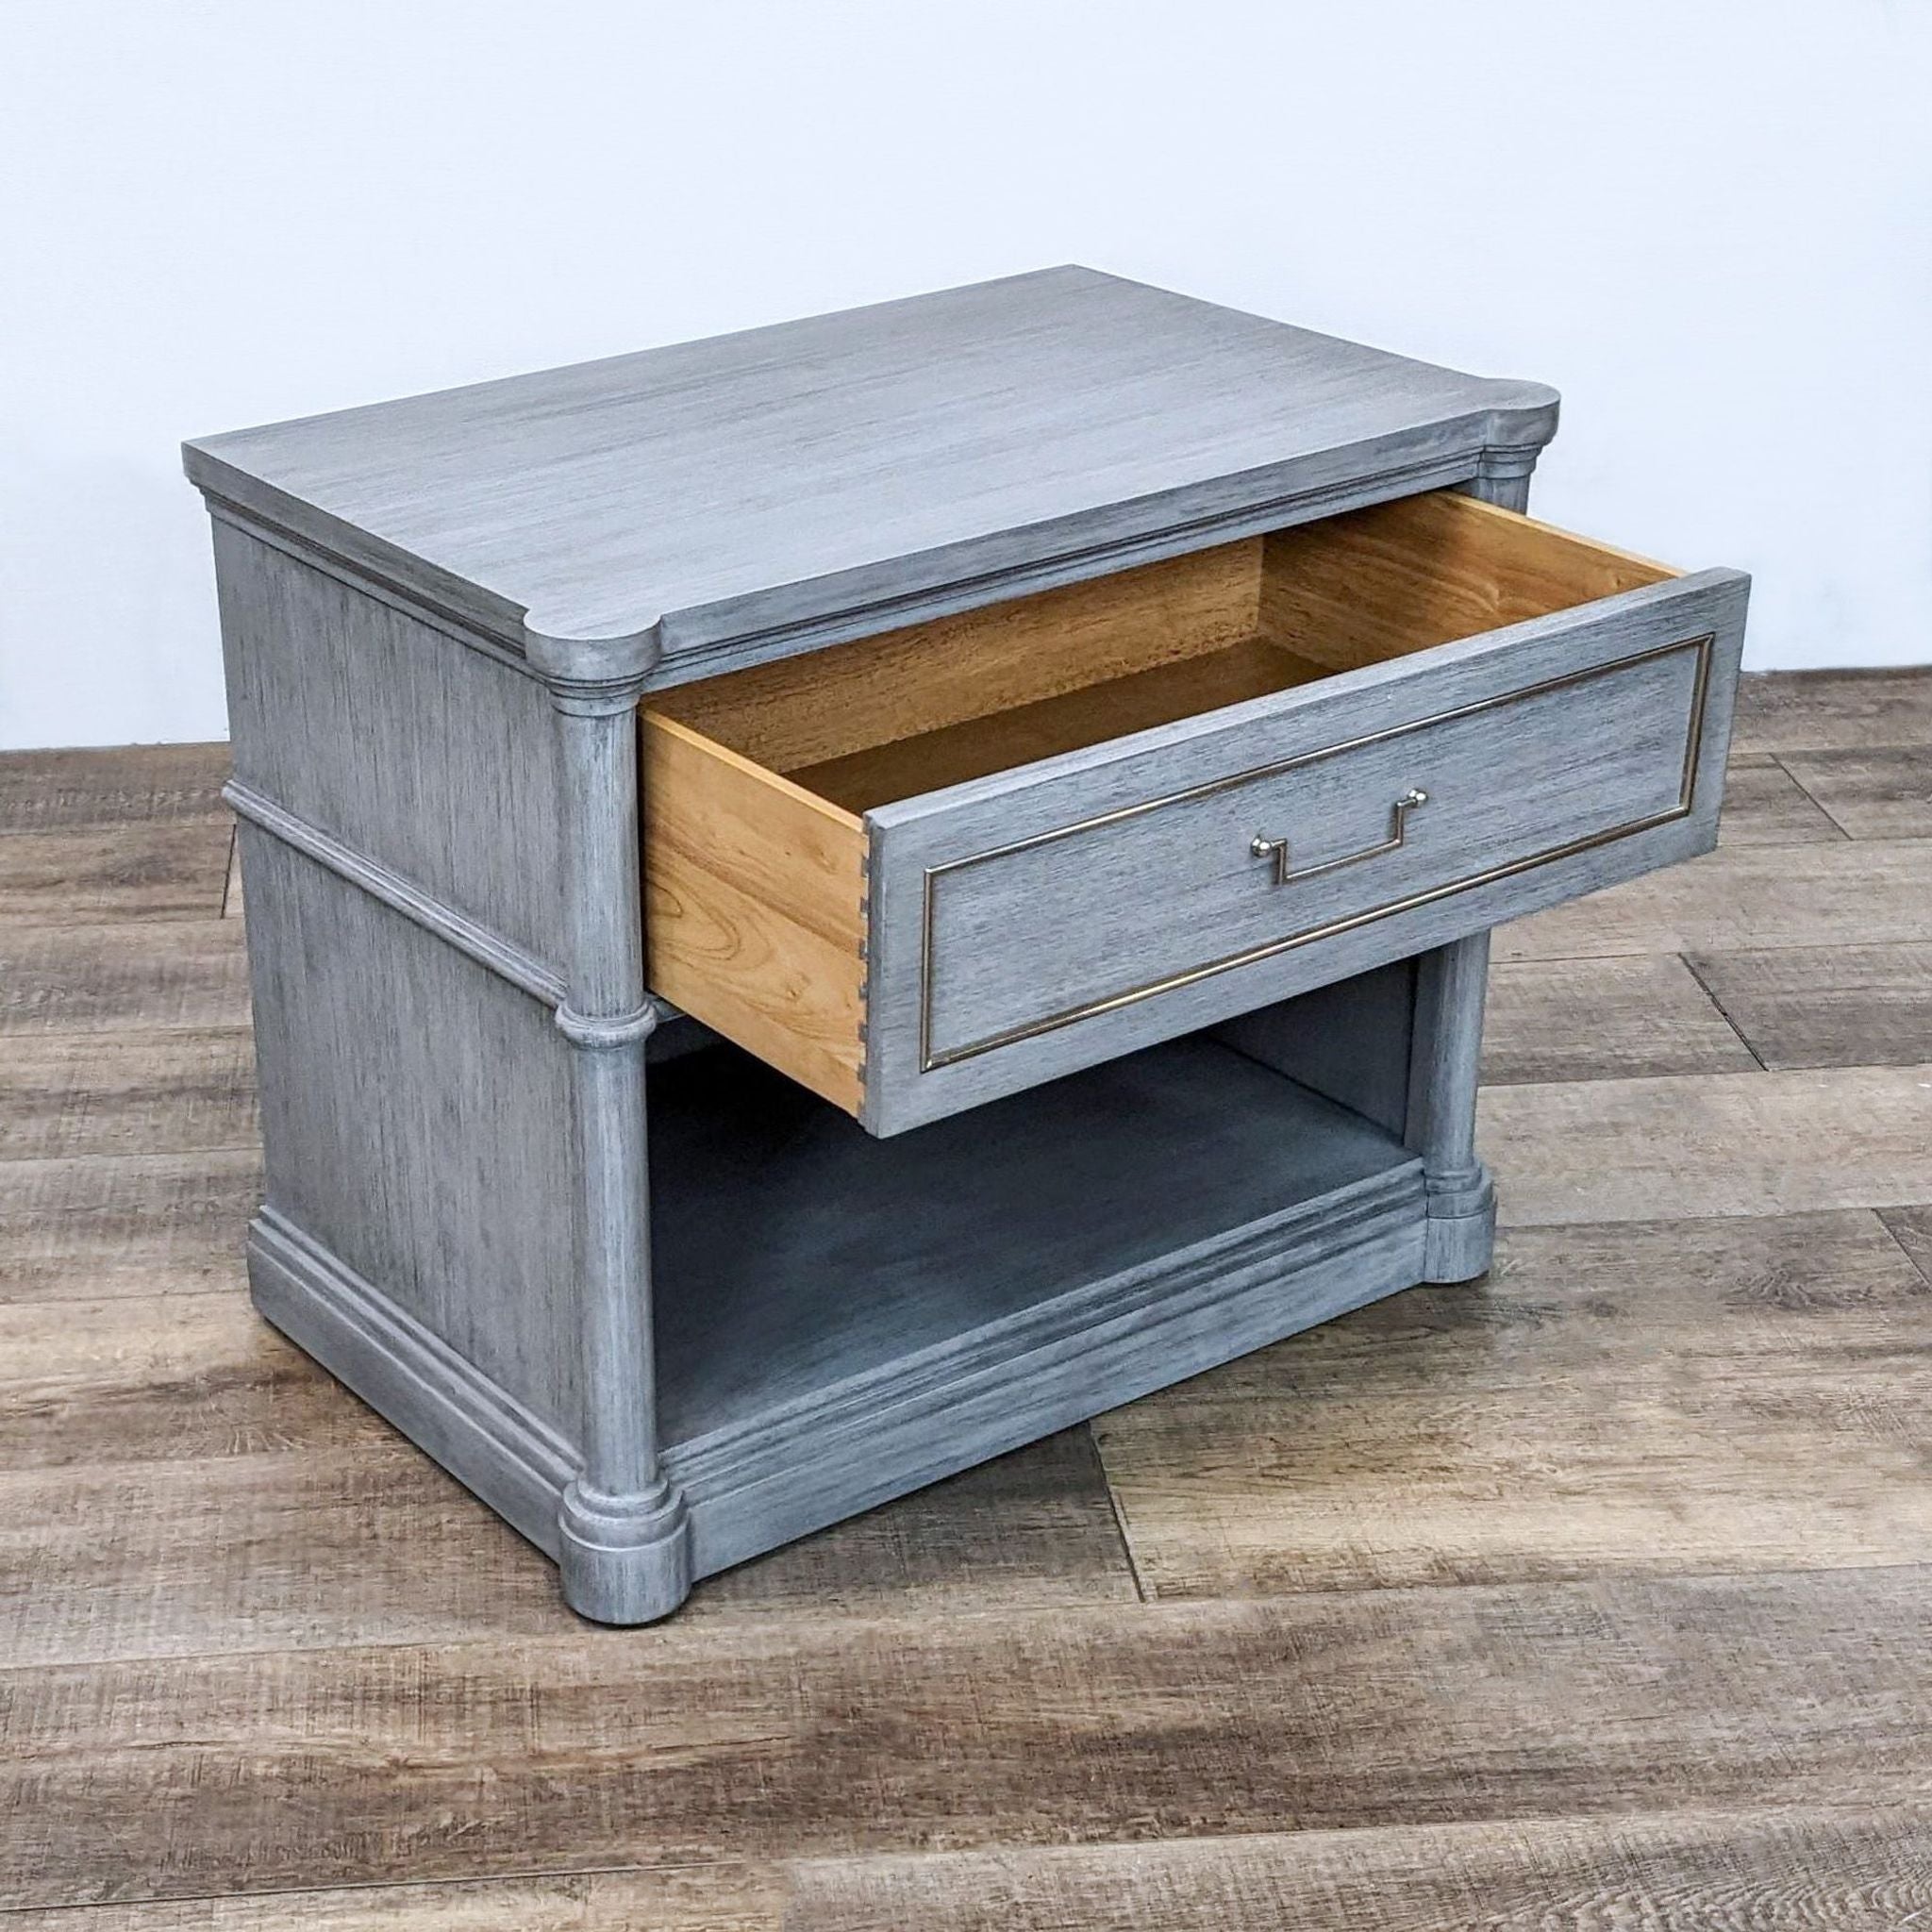 Gray wash Bassett Furniture end table with an open drawer showing wooden interior, metal hardware, and a lower shelf.